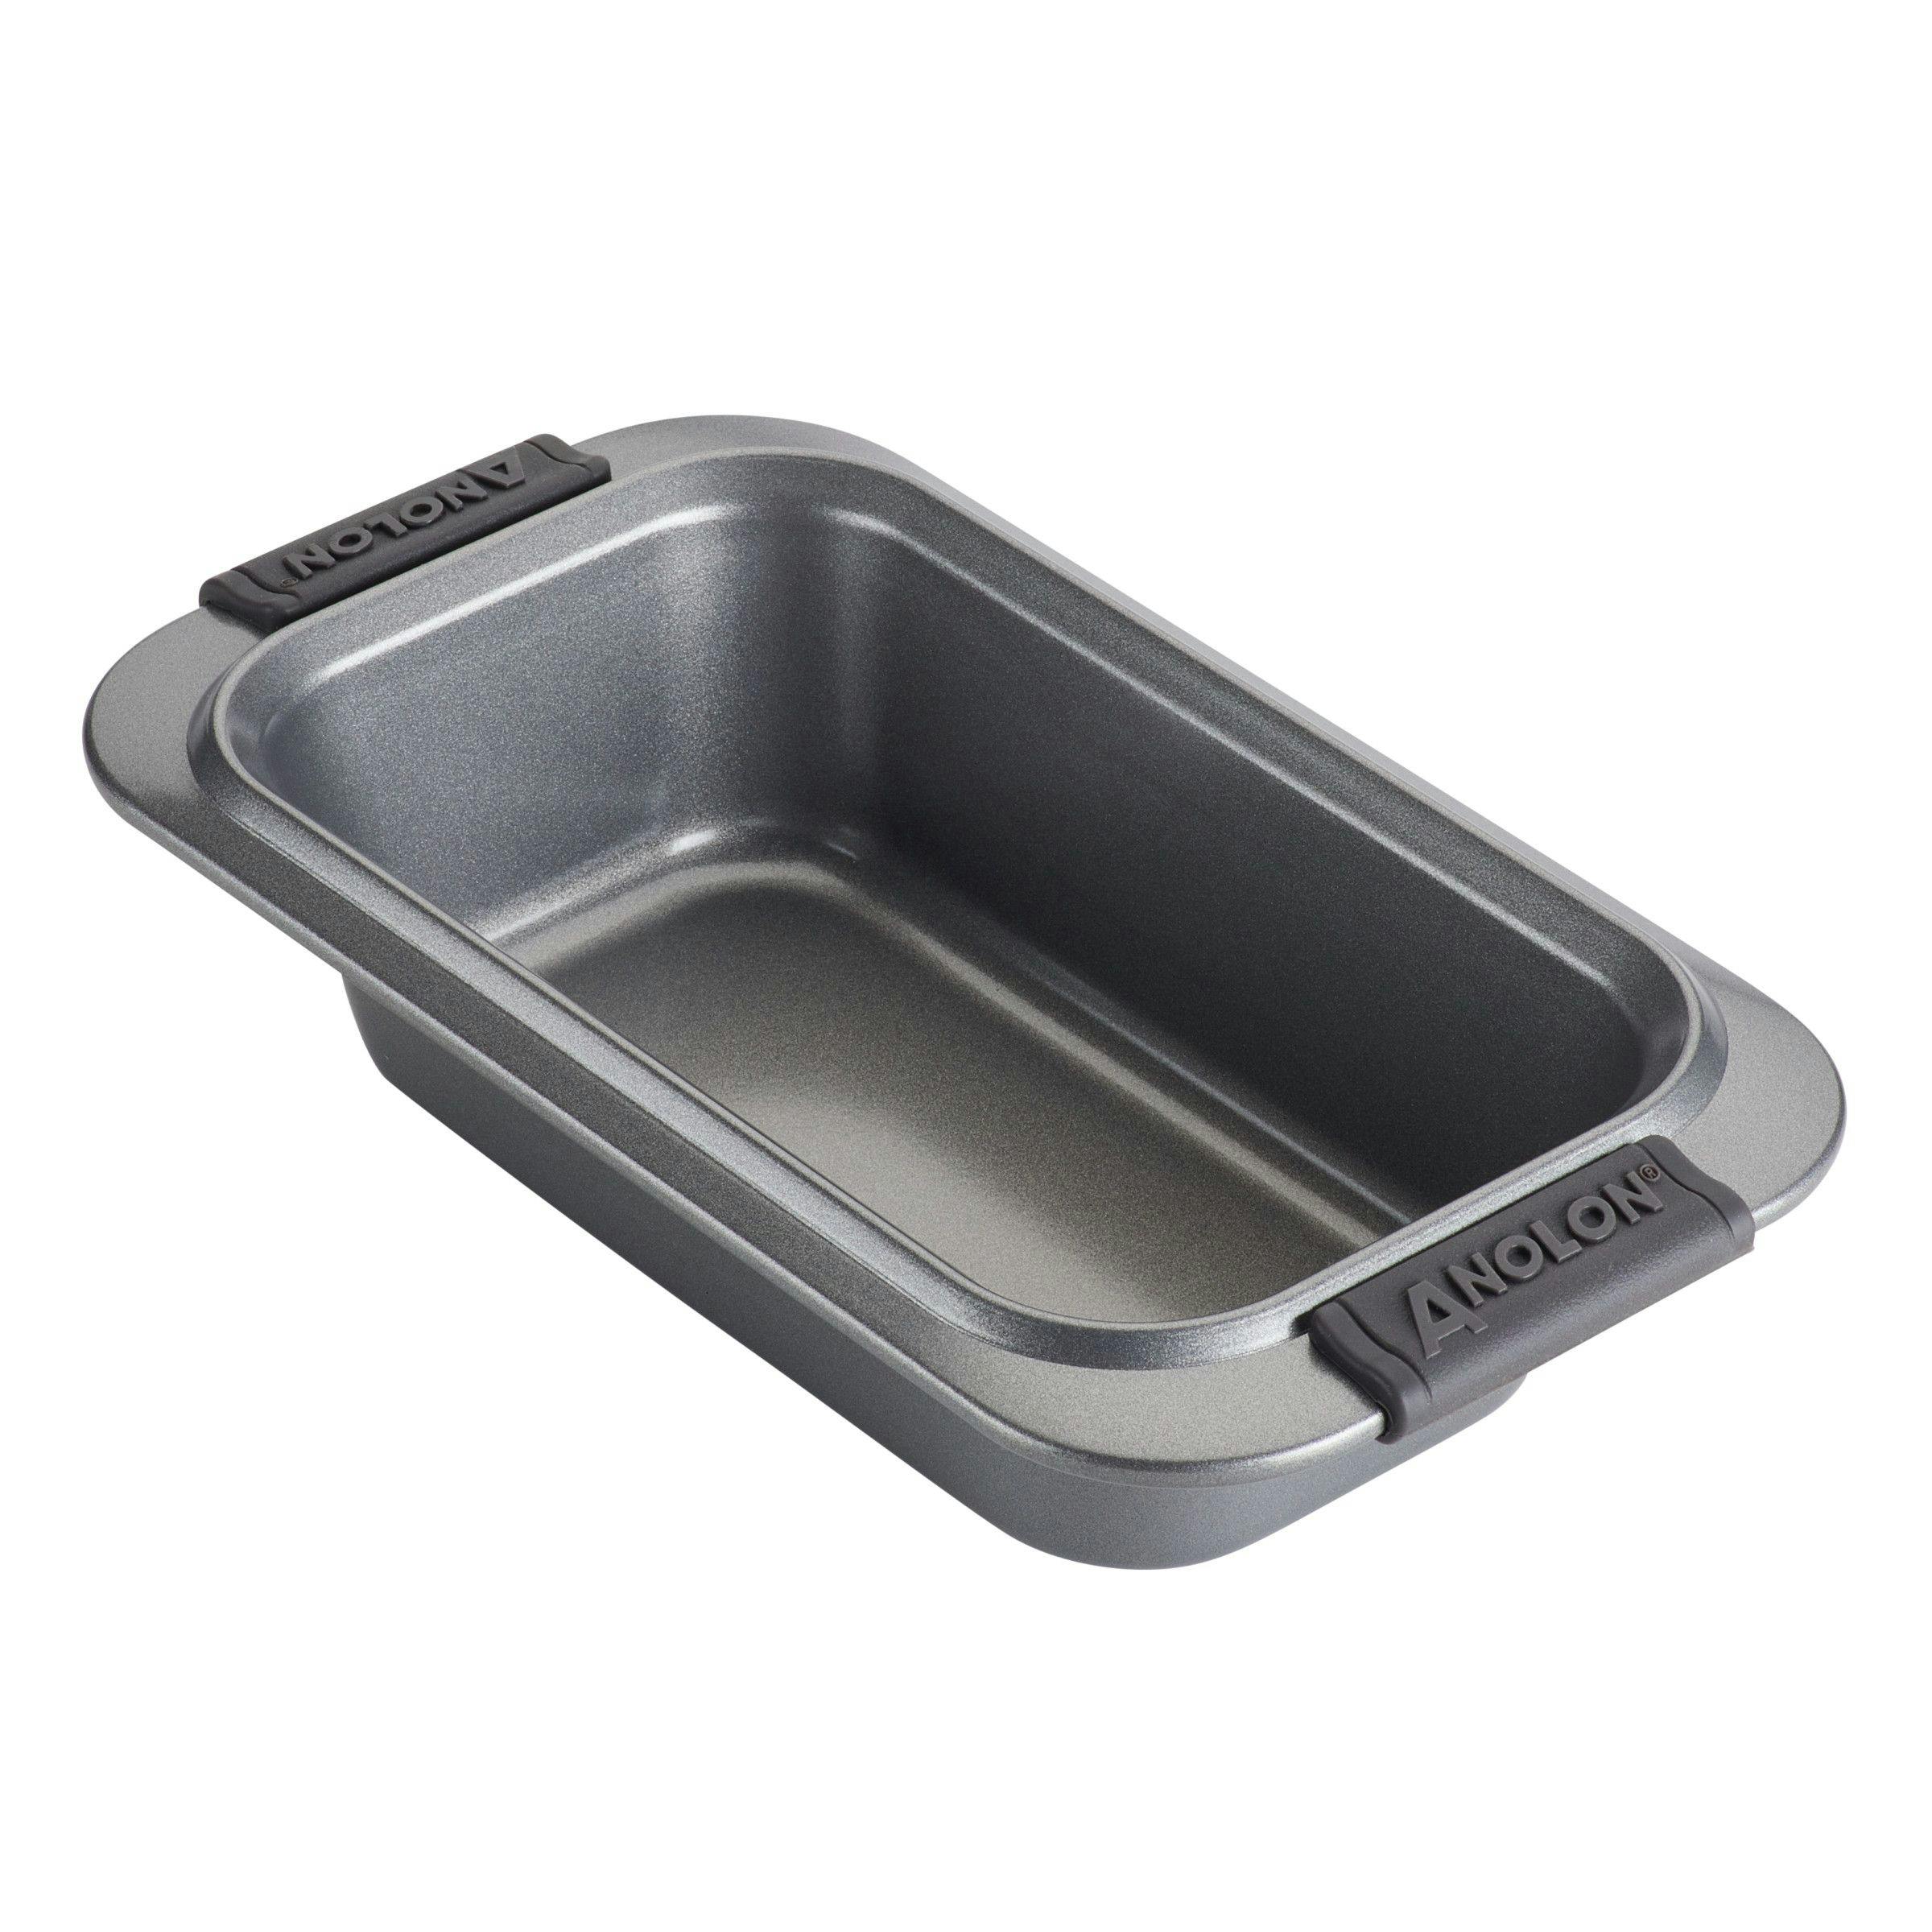 Anolon Advanced Bakeware Nonstick Loaf Pan, 9-Inch x 5-Inch, Gray